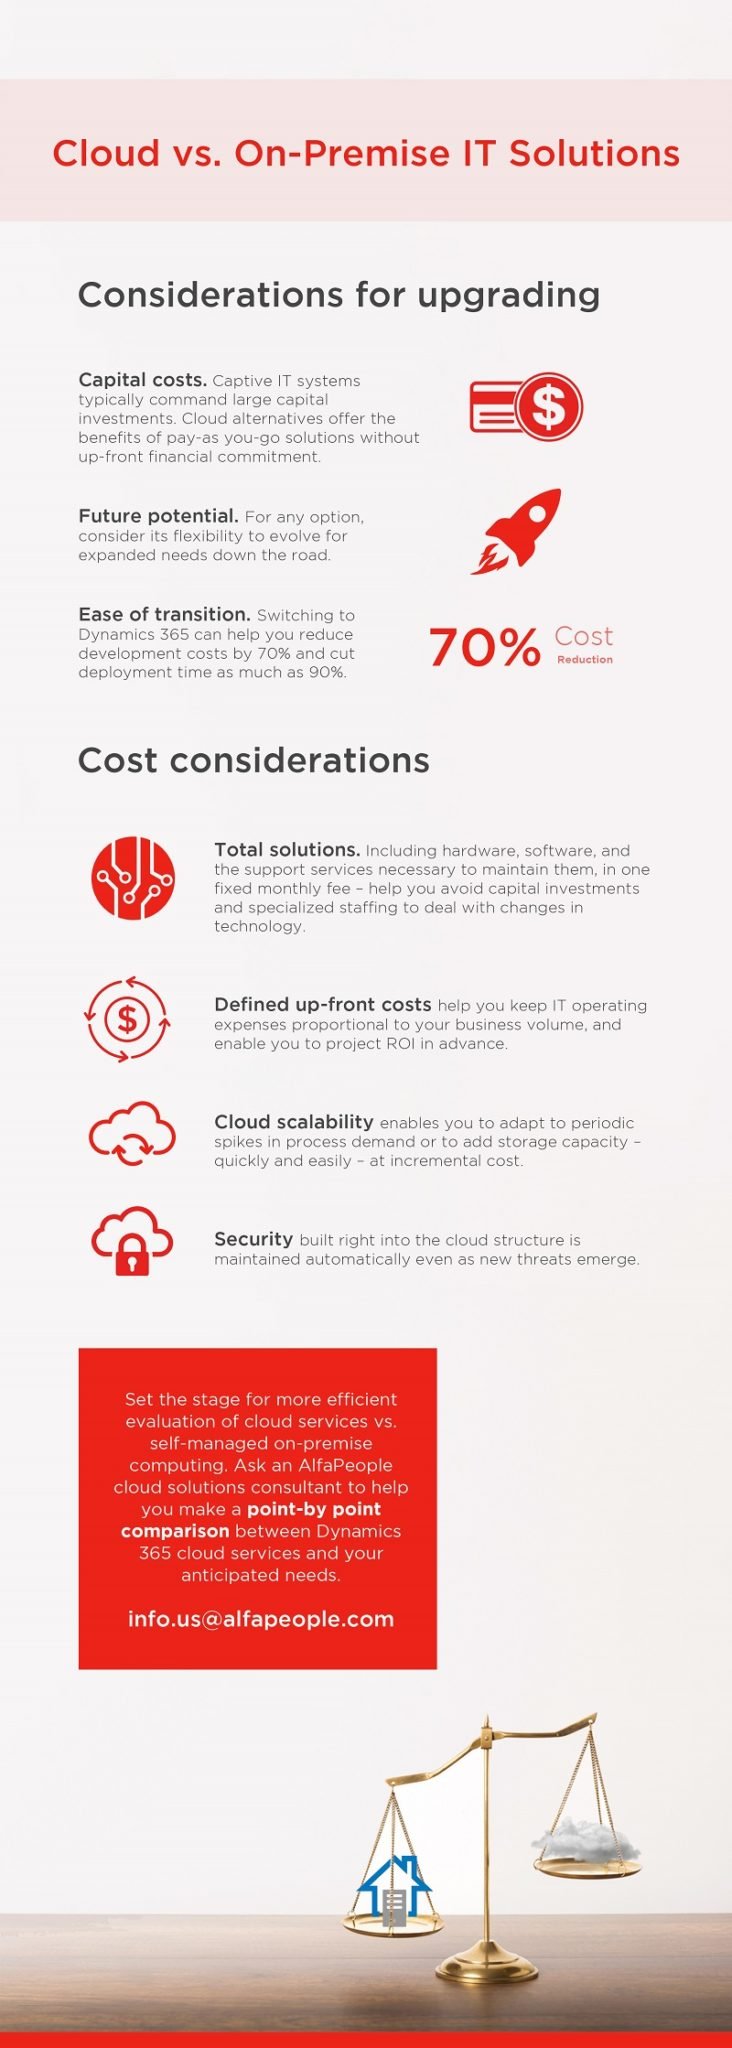 Infographic: Cloud vs. On-Premise IT Solutions